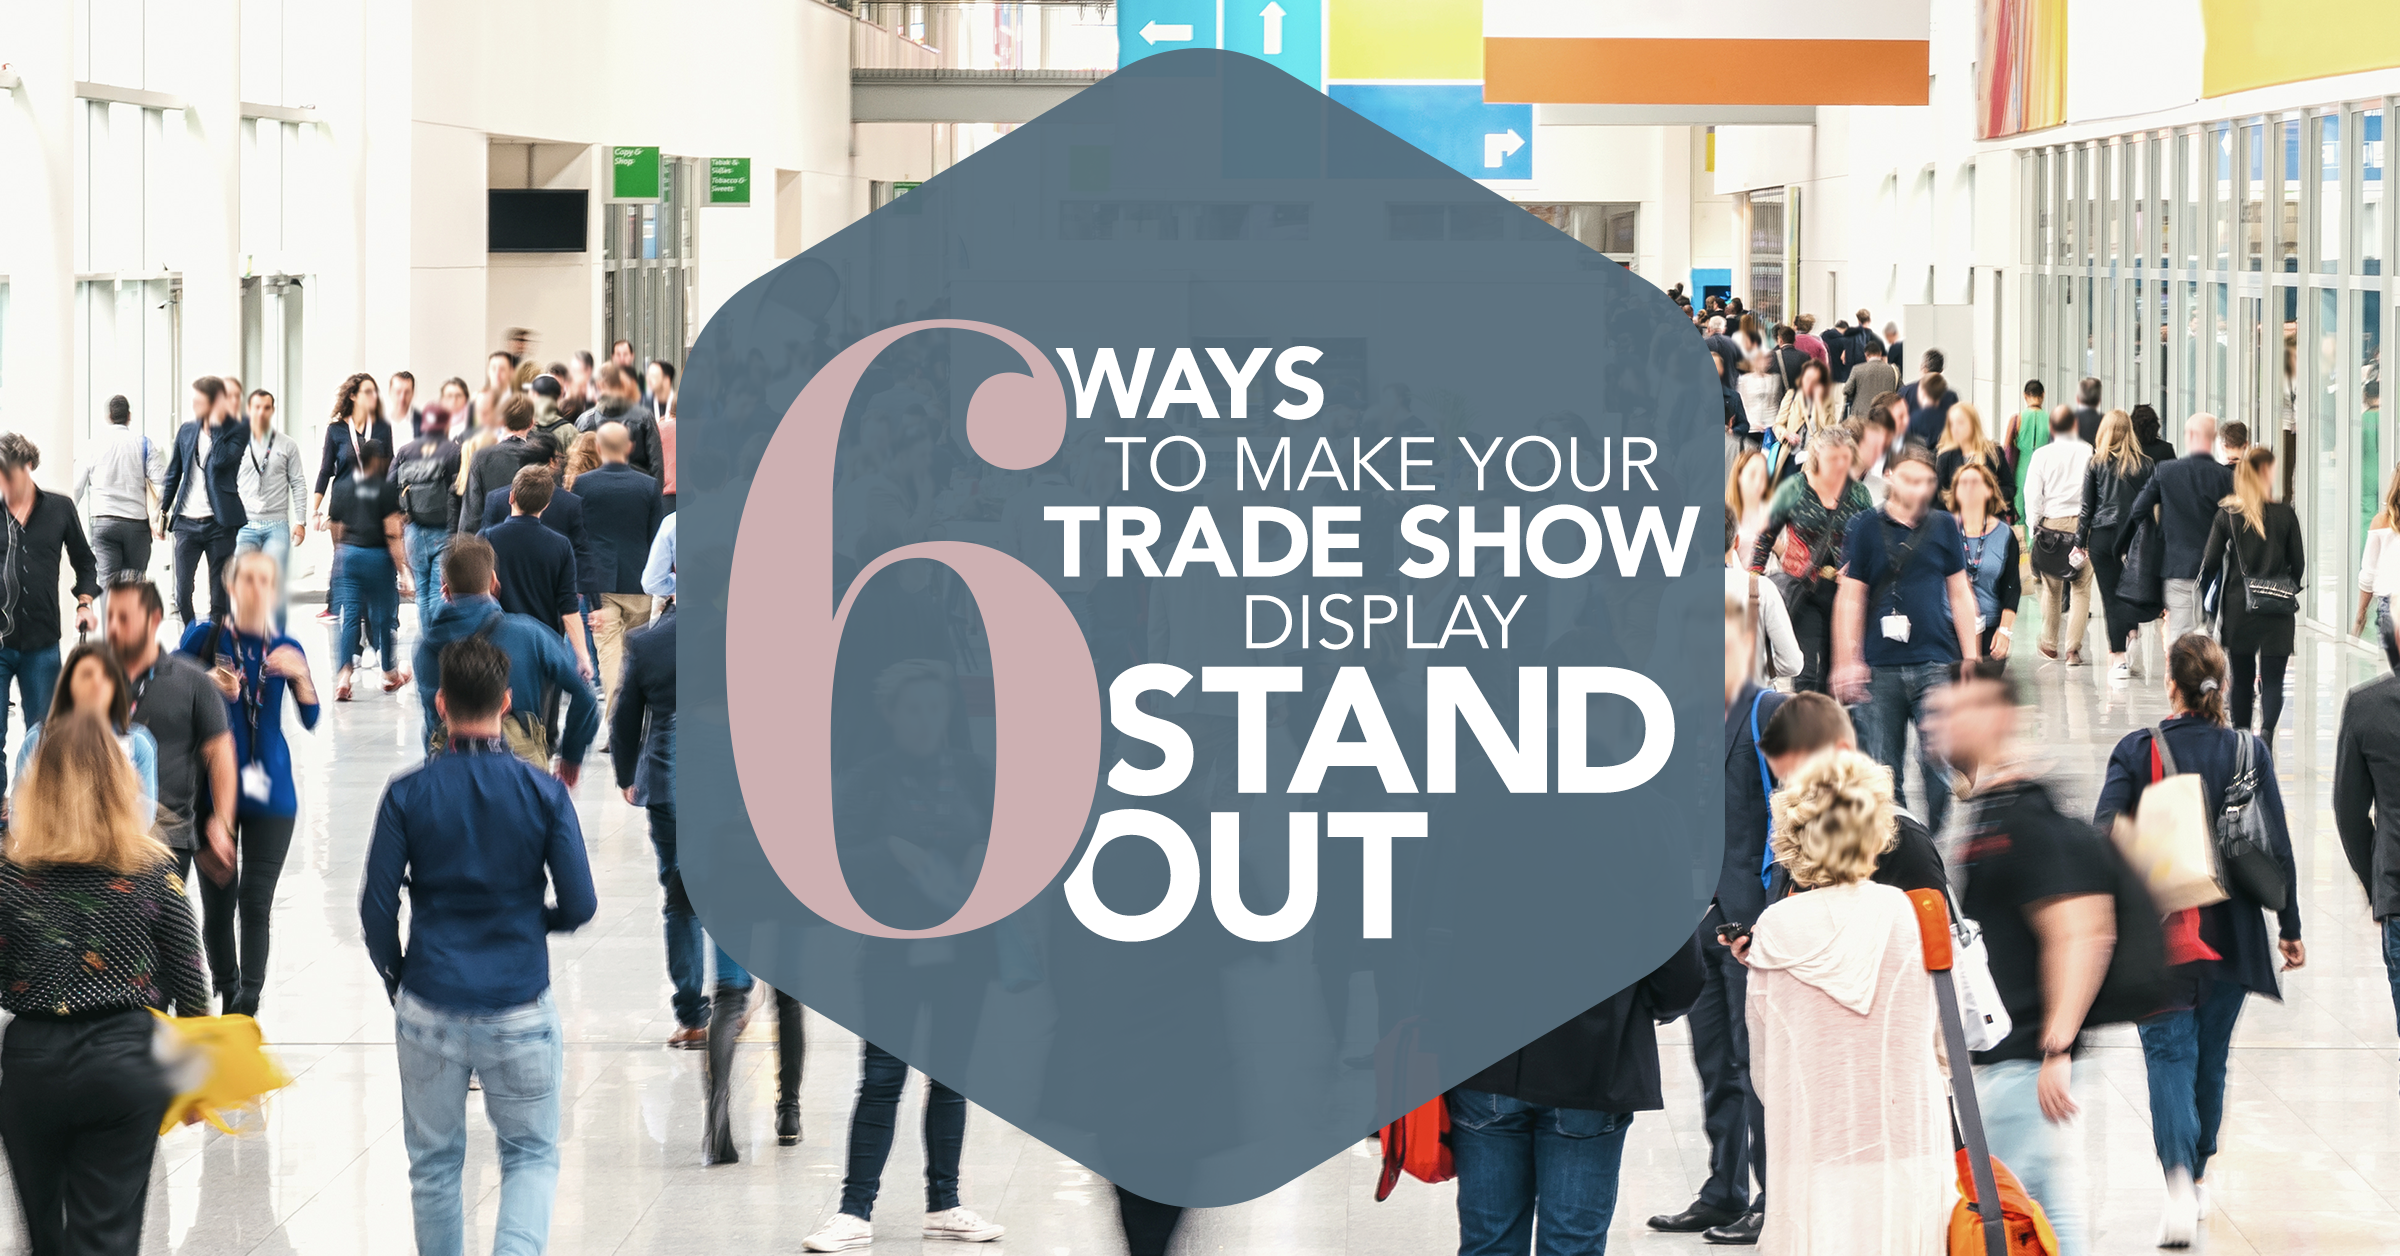 6 Ways to Make Your Trade Show Display Stand Out From the Rest